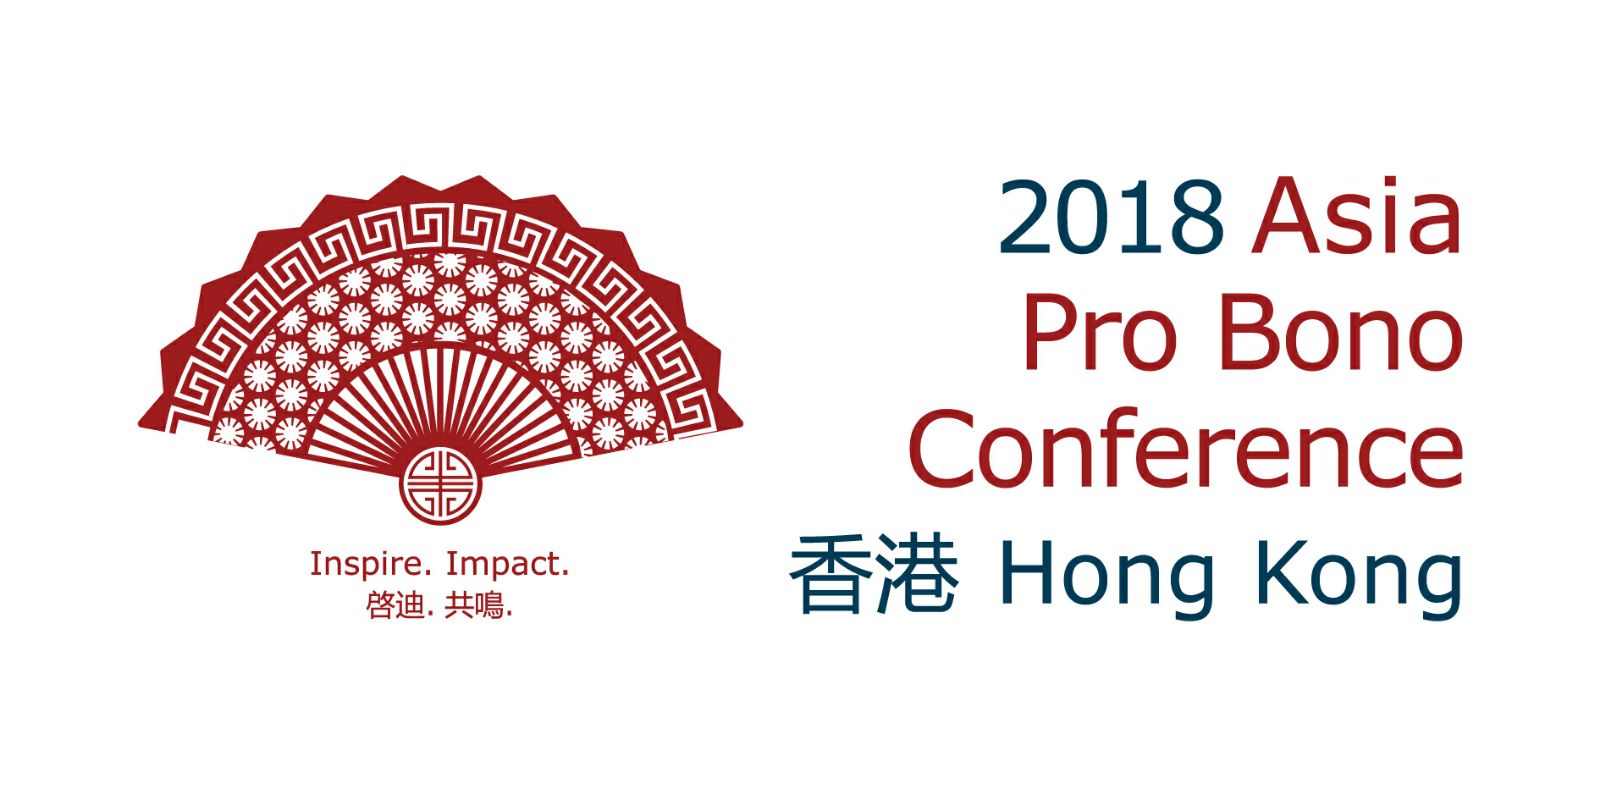 This year's Asia Pro Bono Conference will be held in Hong Kong from 25th - 27th October 2018